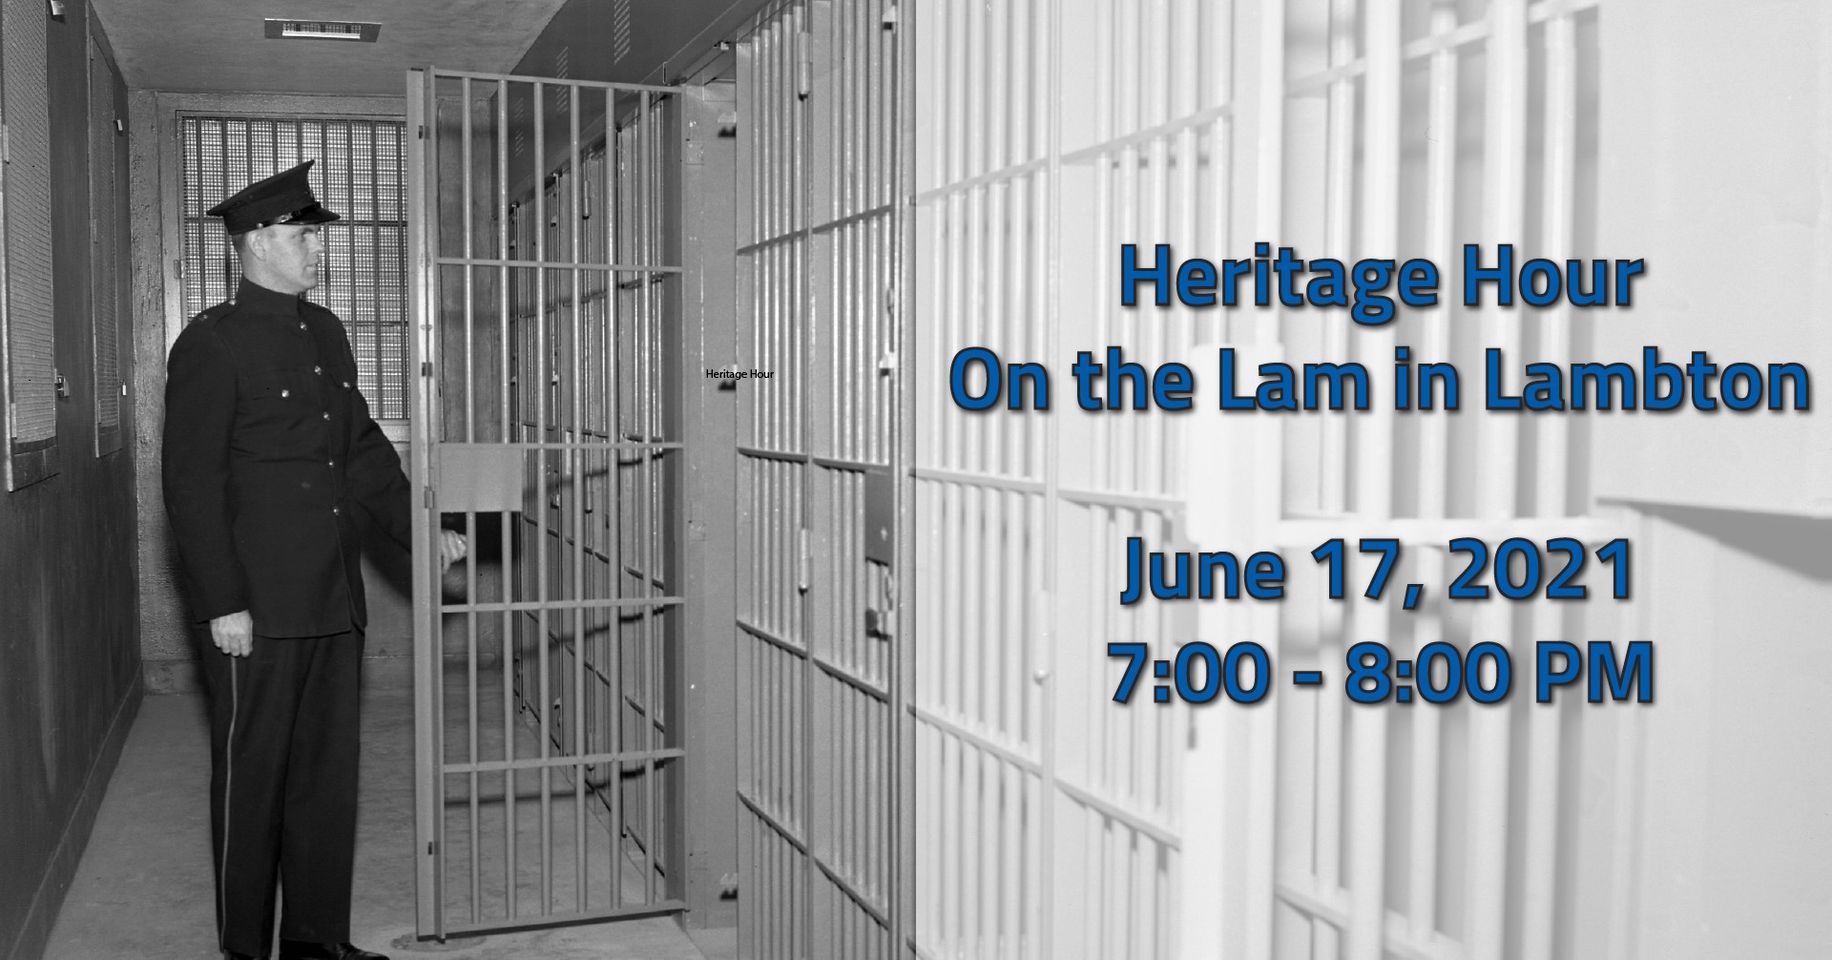 man standing in front of jail cell with "on the lam in lambton" event details overlayed